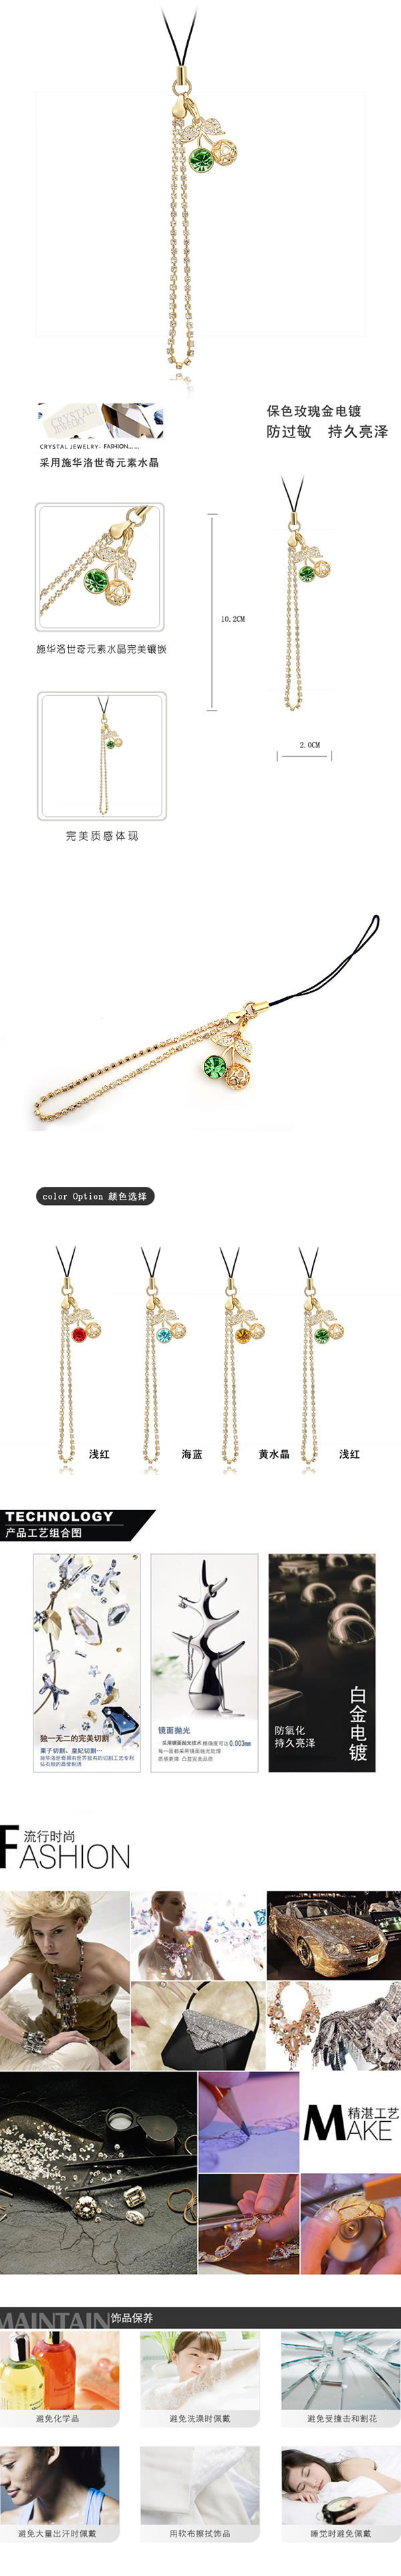 Plus Size green Champagne
Champagne Cherry Design Alloy Mobile phone products,Anti-Dust Plug